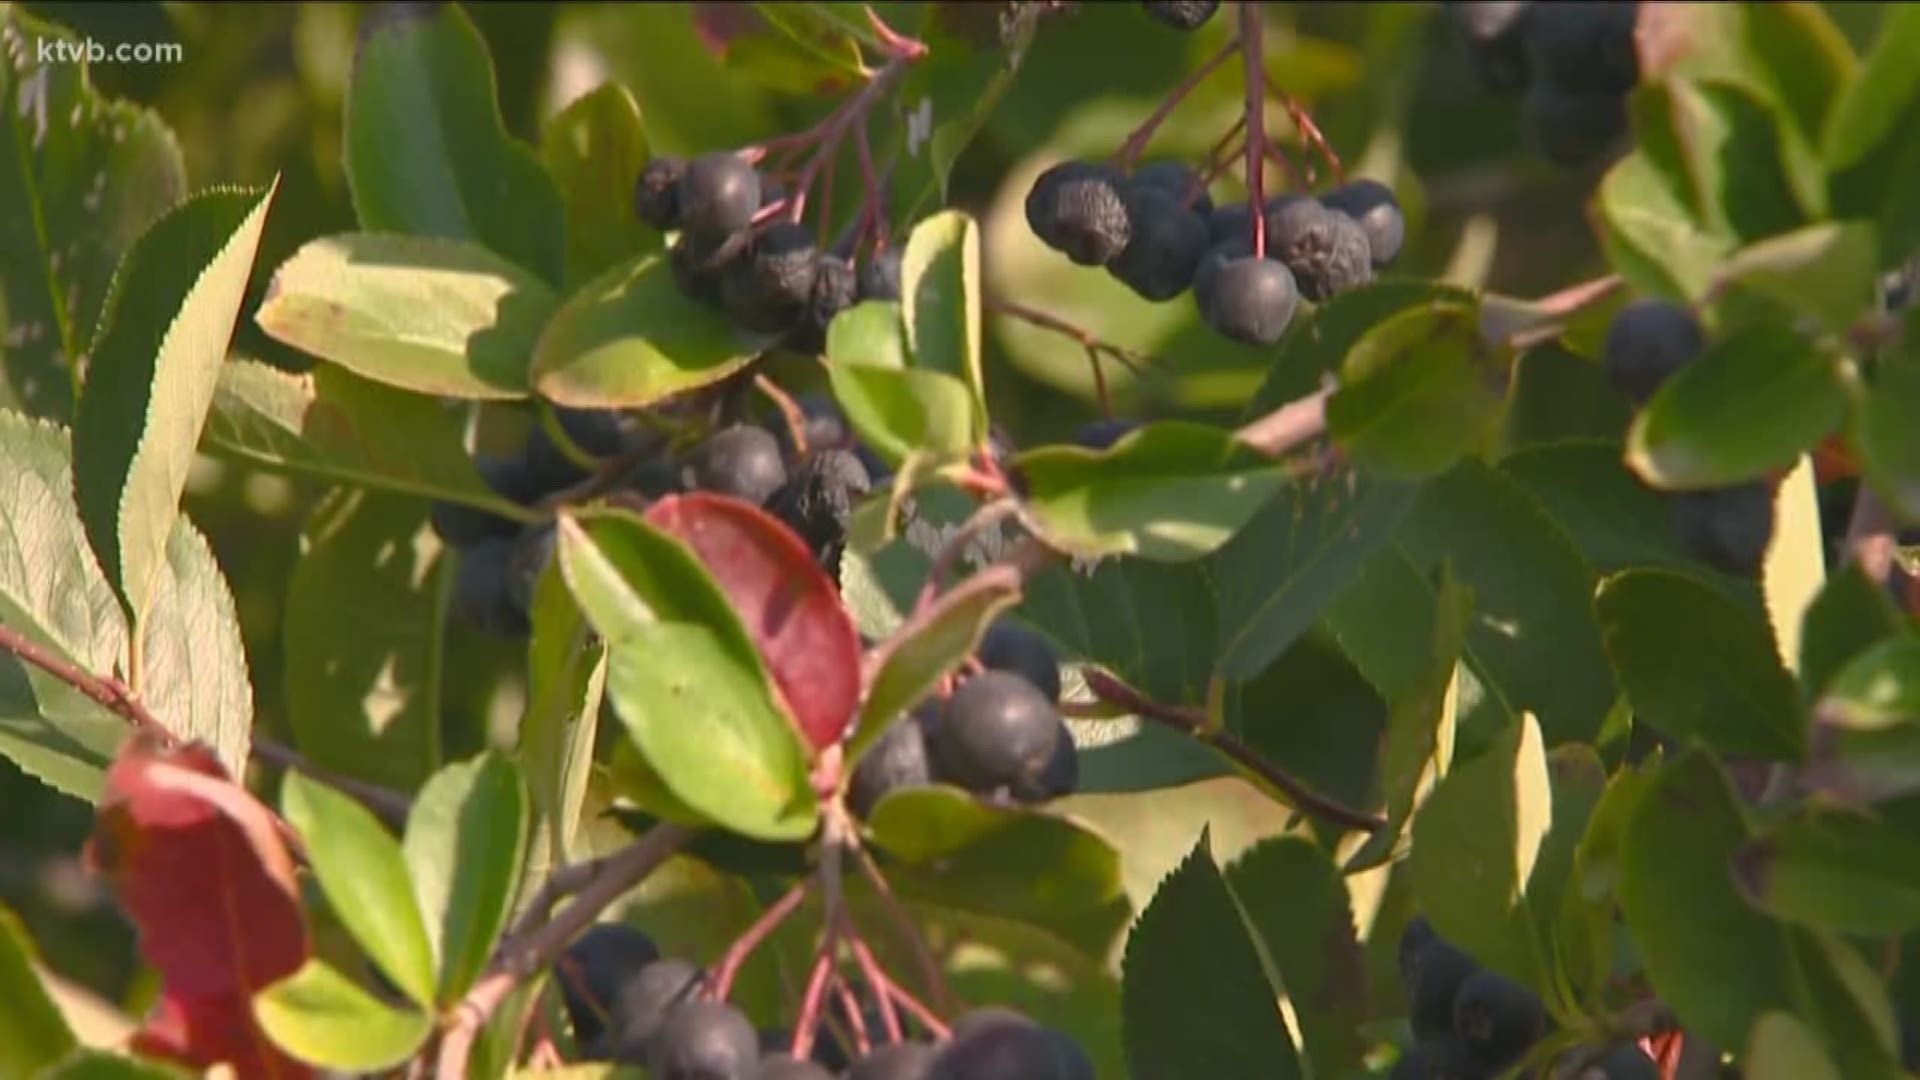 Jim Duthie takes us to a local farm where they are growing an unfamiliar berry.